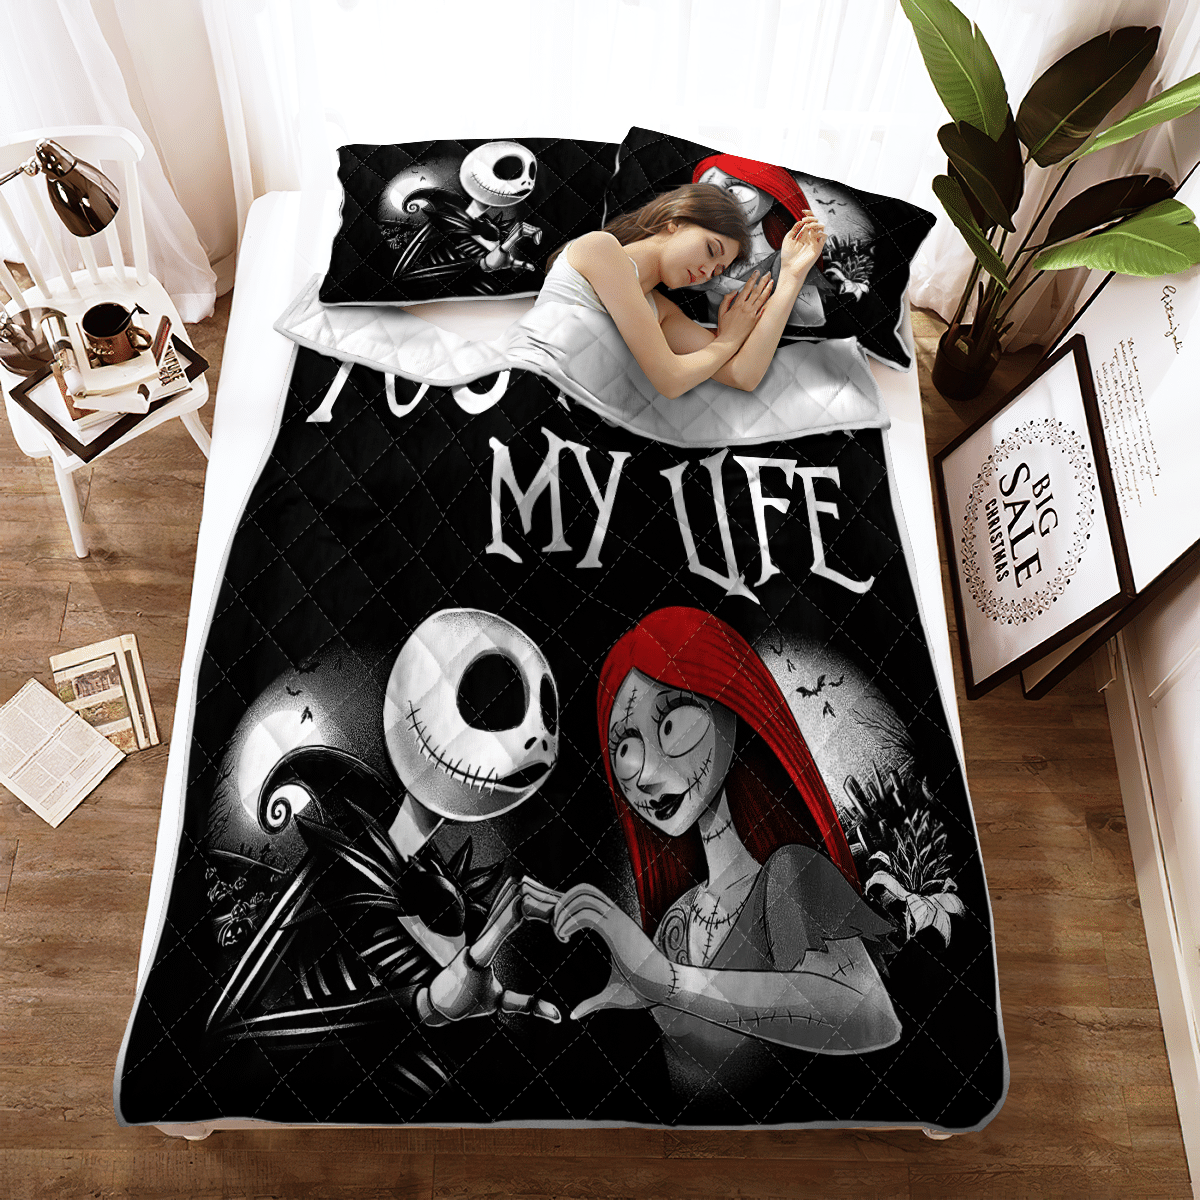 You Look Like The Rest Of My Life Quilt - Bedding Set